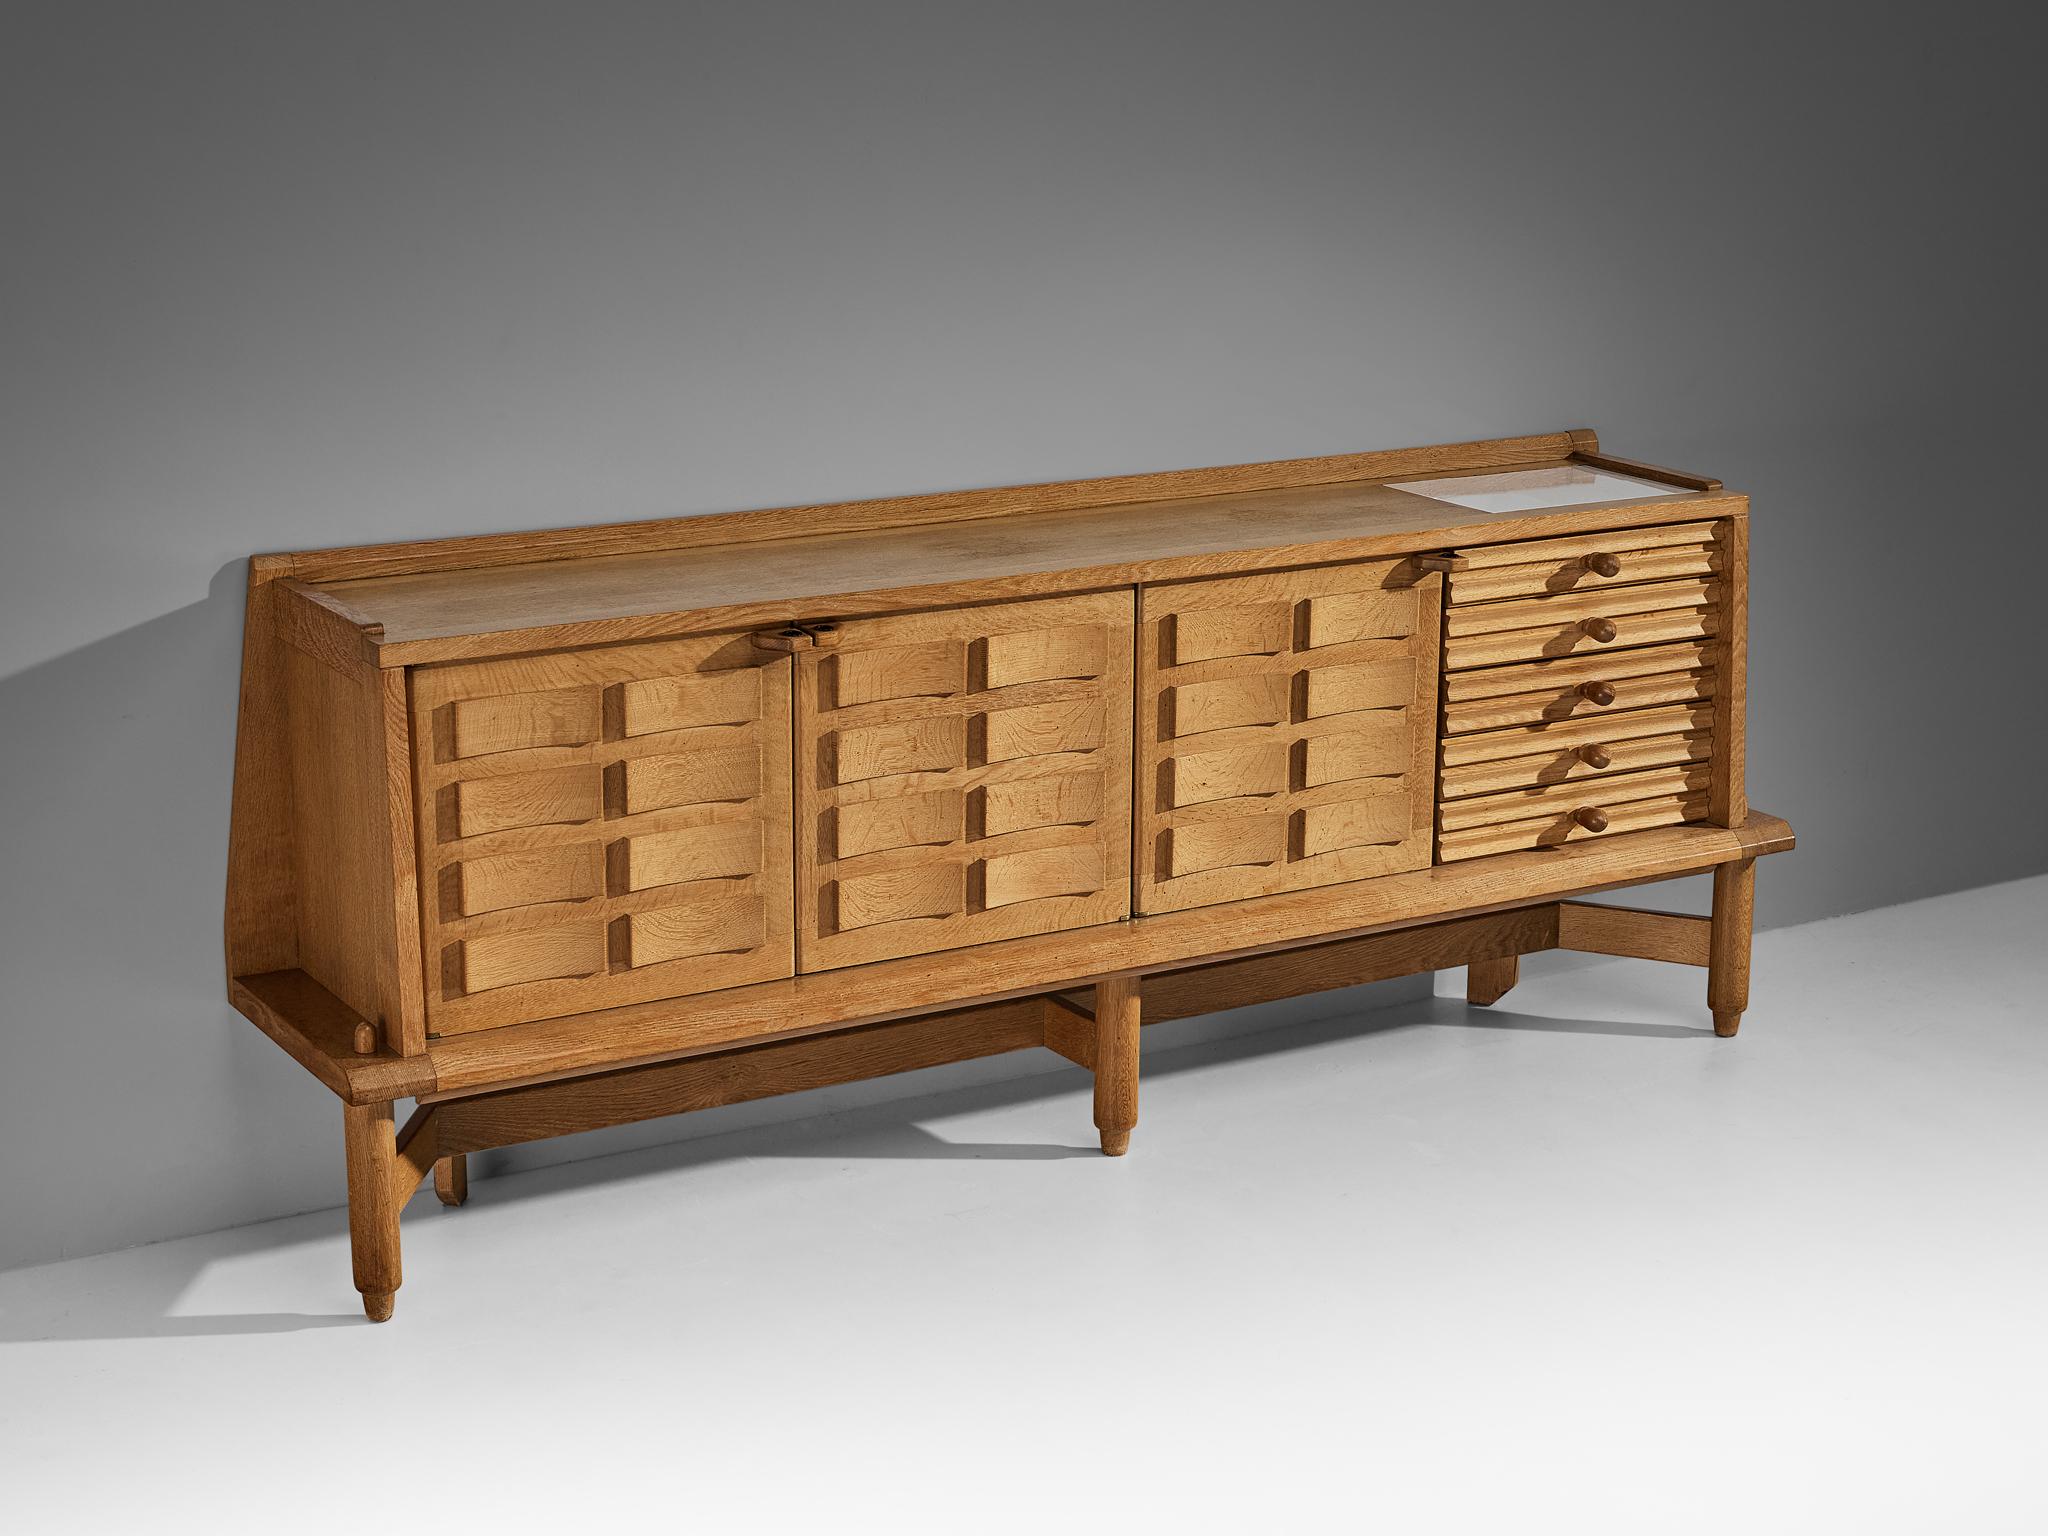 Guillerme and Chambron for Votre Maison, large sideboard in oak, France, 1960s

This large sideboard is designed by French designer dup Guillerme et Chambron. It features three doors with a geometric structure on the front, in the shape of